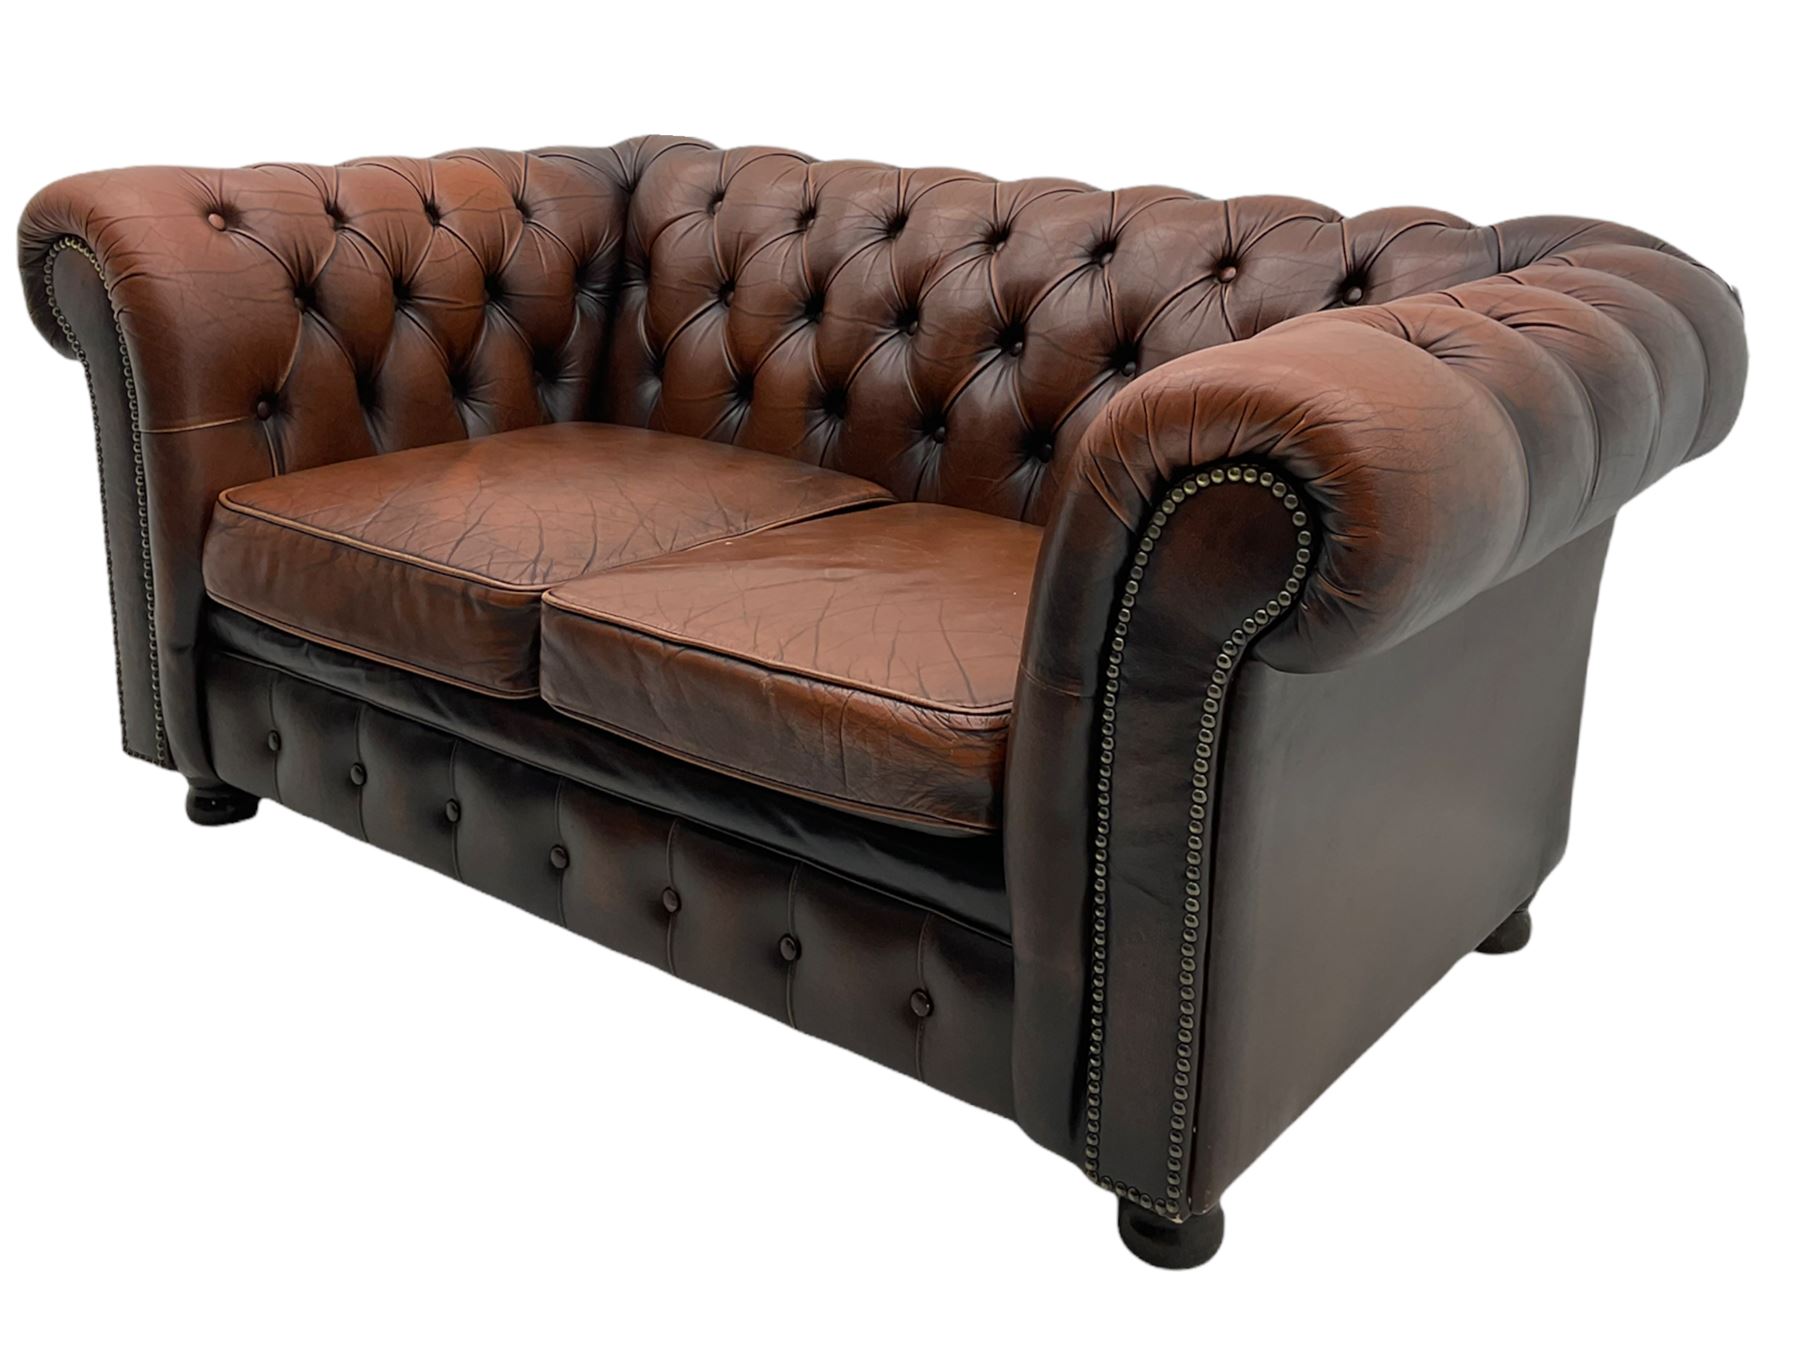 Chesterfield two seat sofa - Image 3 of 6